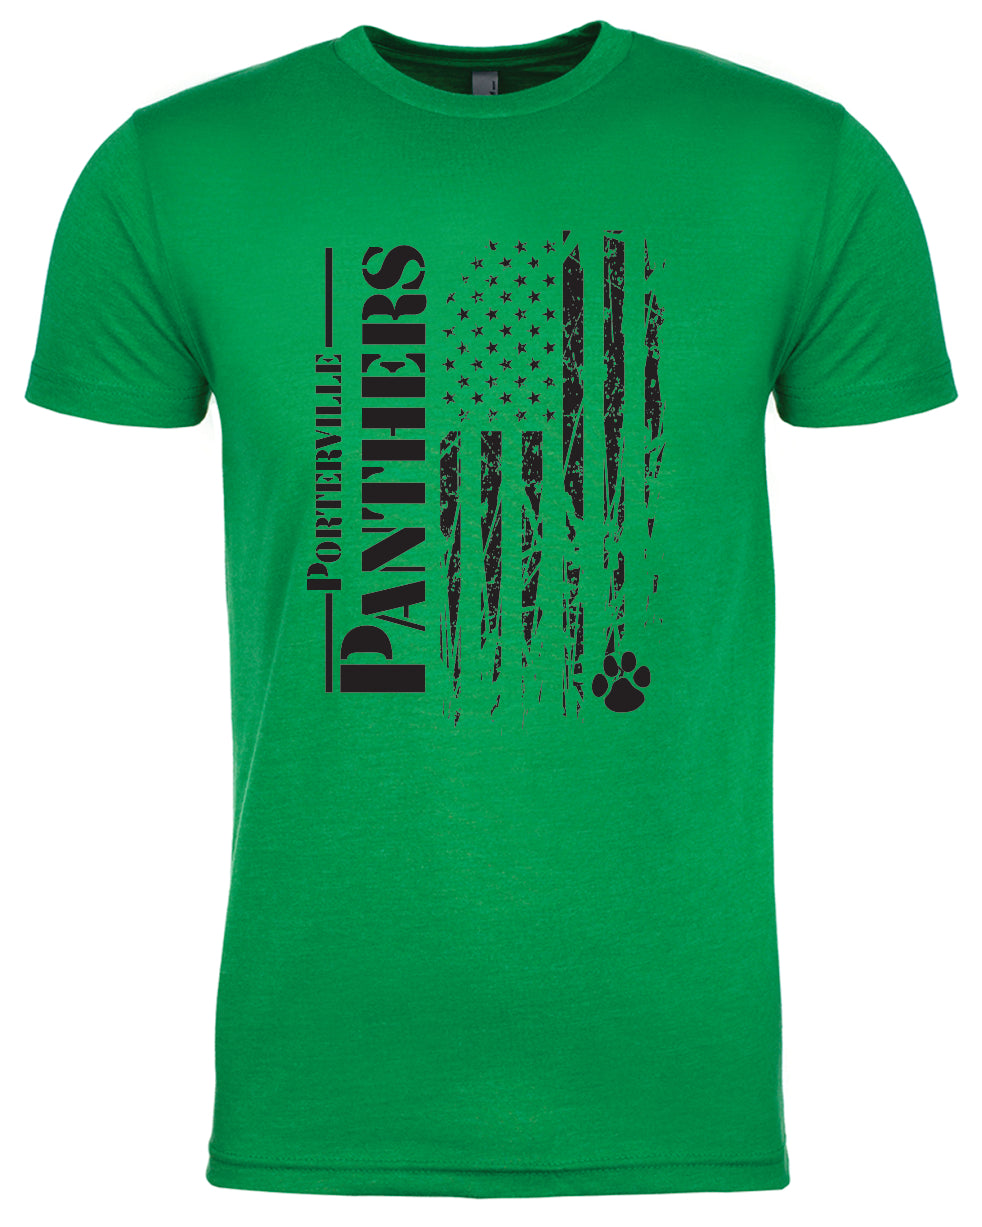 American Panthers T-shirt